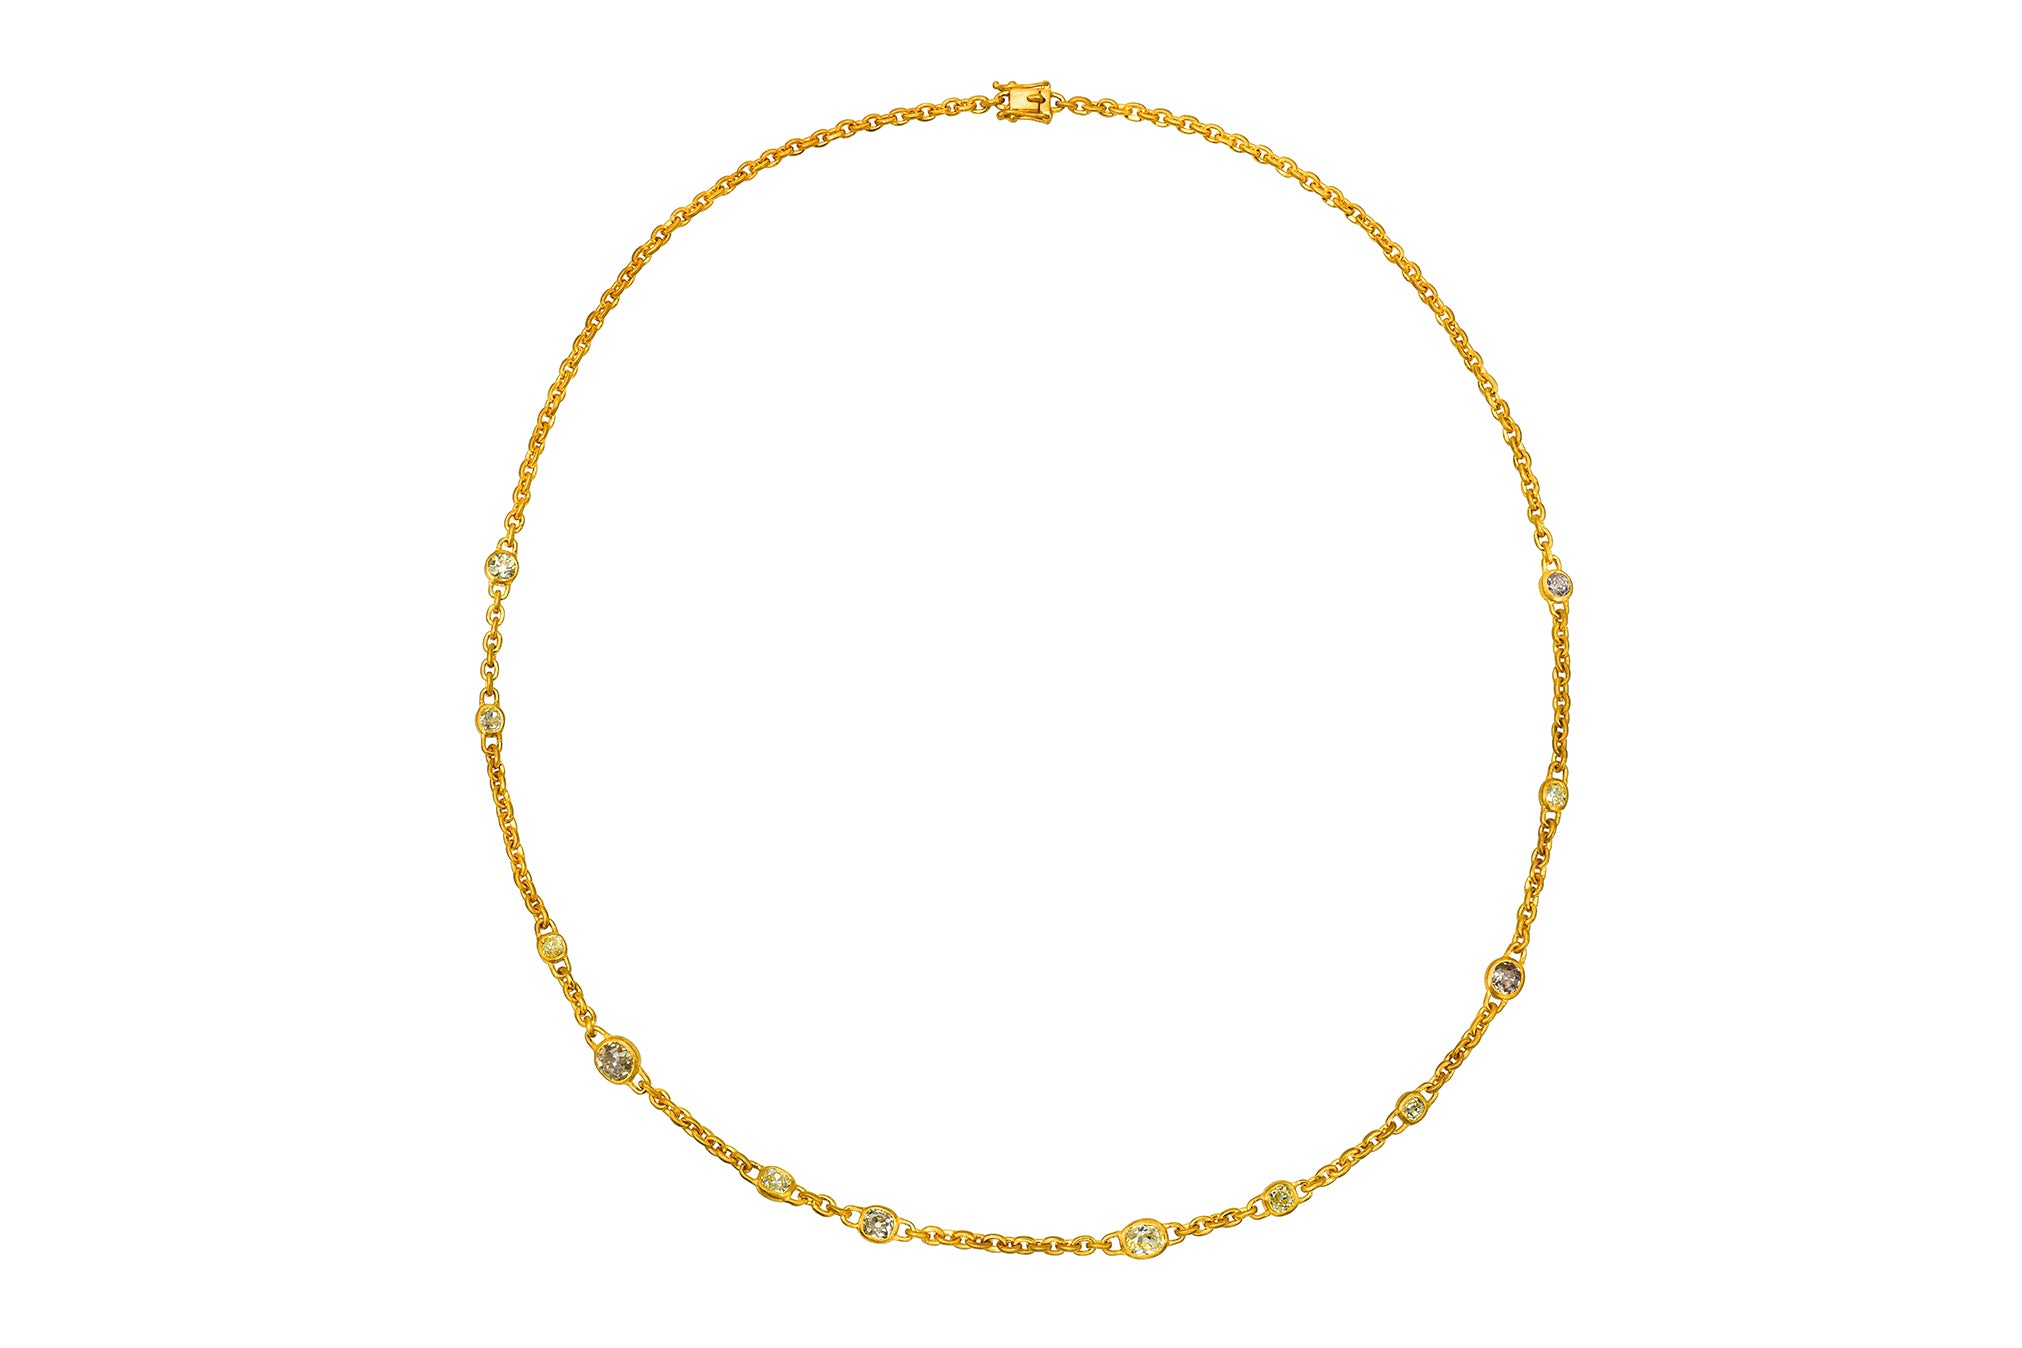 Darius Jewels One of a Kind Champagne Diamond Fairy Chain Necklace Bezel Set 18K Fairmined Yellow Gold